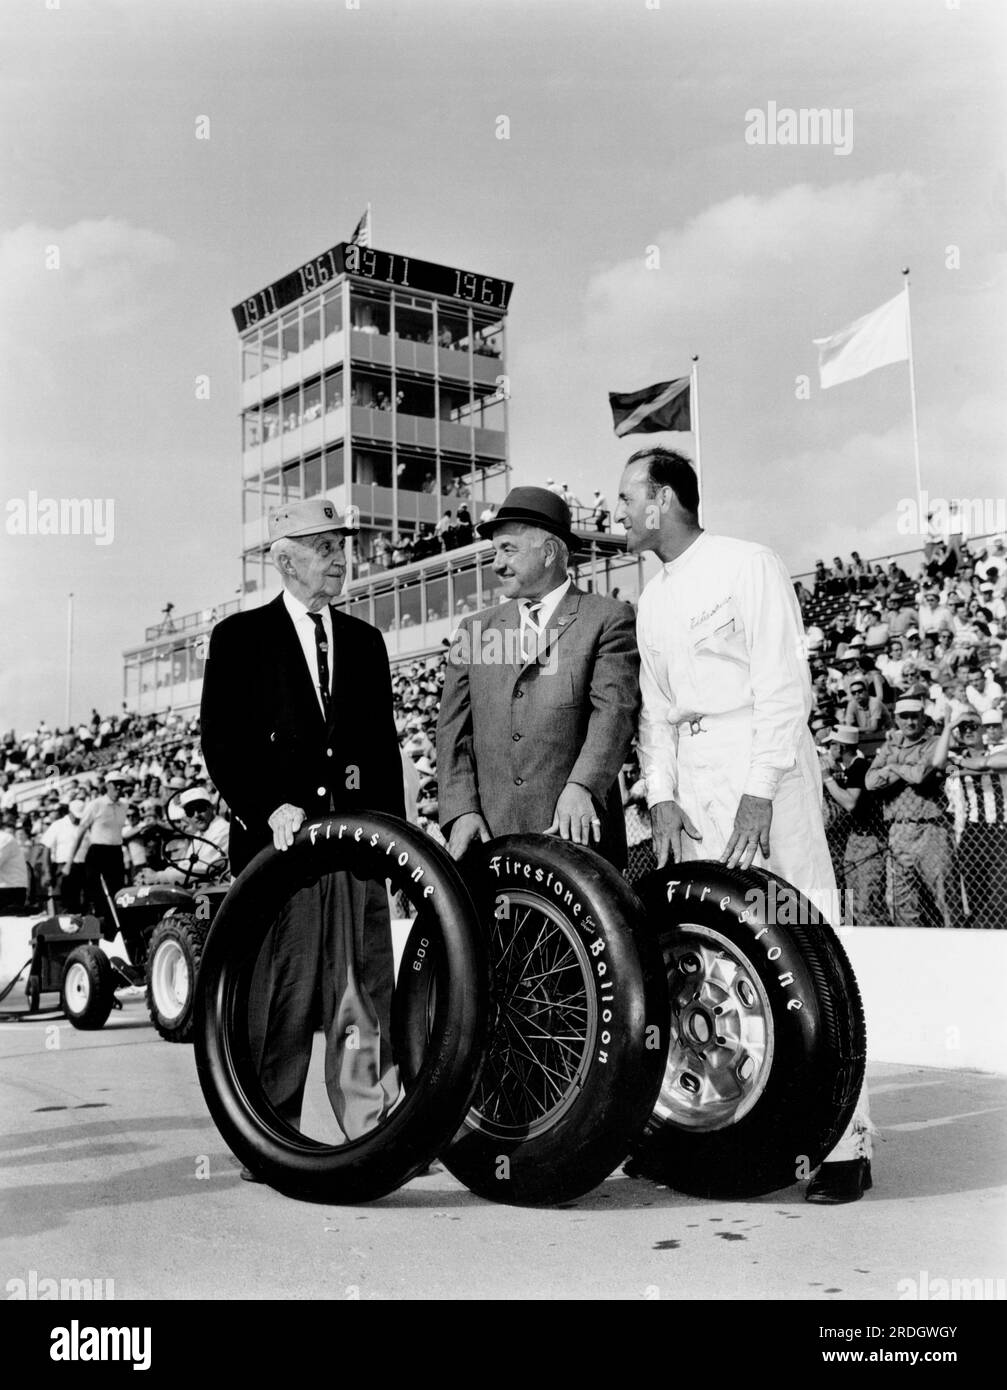 Indianapolis, Indiana:  May, 1961 Three generations of Indy 500 race car drivers and the Firestone tires they drove on pose at the 50th anniversary of the race. Left to right: Ray Harroun, winner of the first  Indy 500 in 1911; Peter De Paolo, winner of the 1925 event and the first to average more than 100 mph for the race, as well as the first driver to win using low pressure balloon tires; and Eddie Sachs, winner of the pole position for the second straight year. Stock Photo